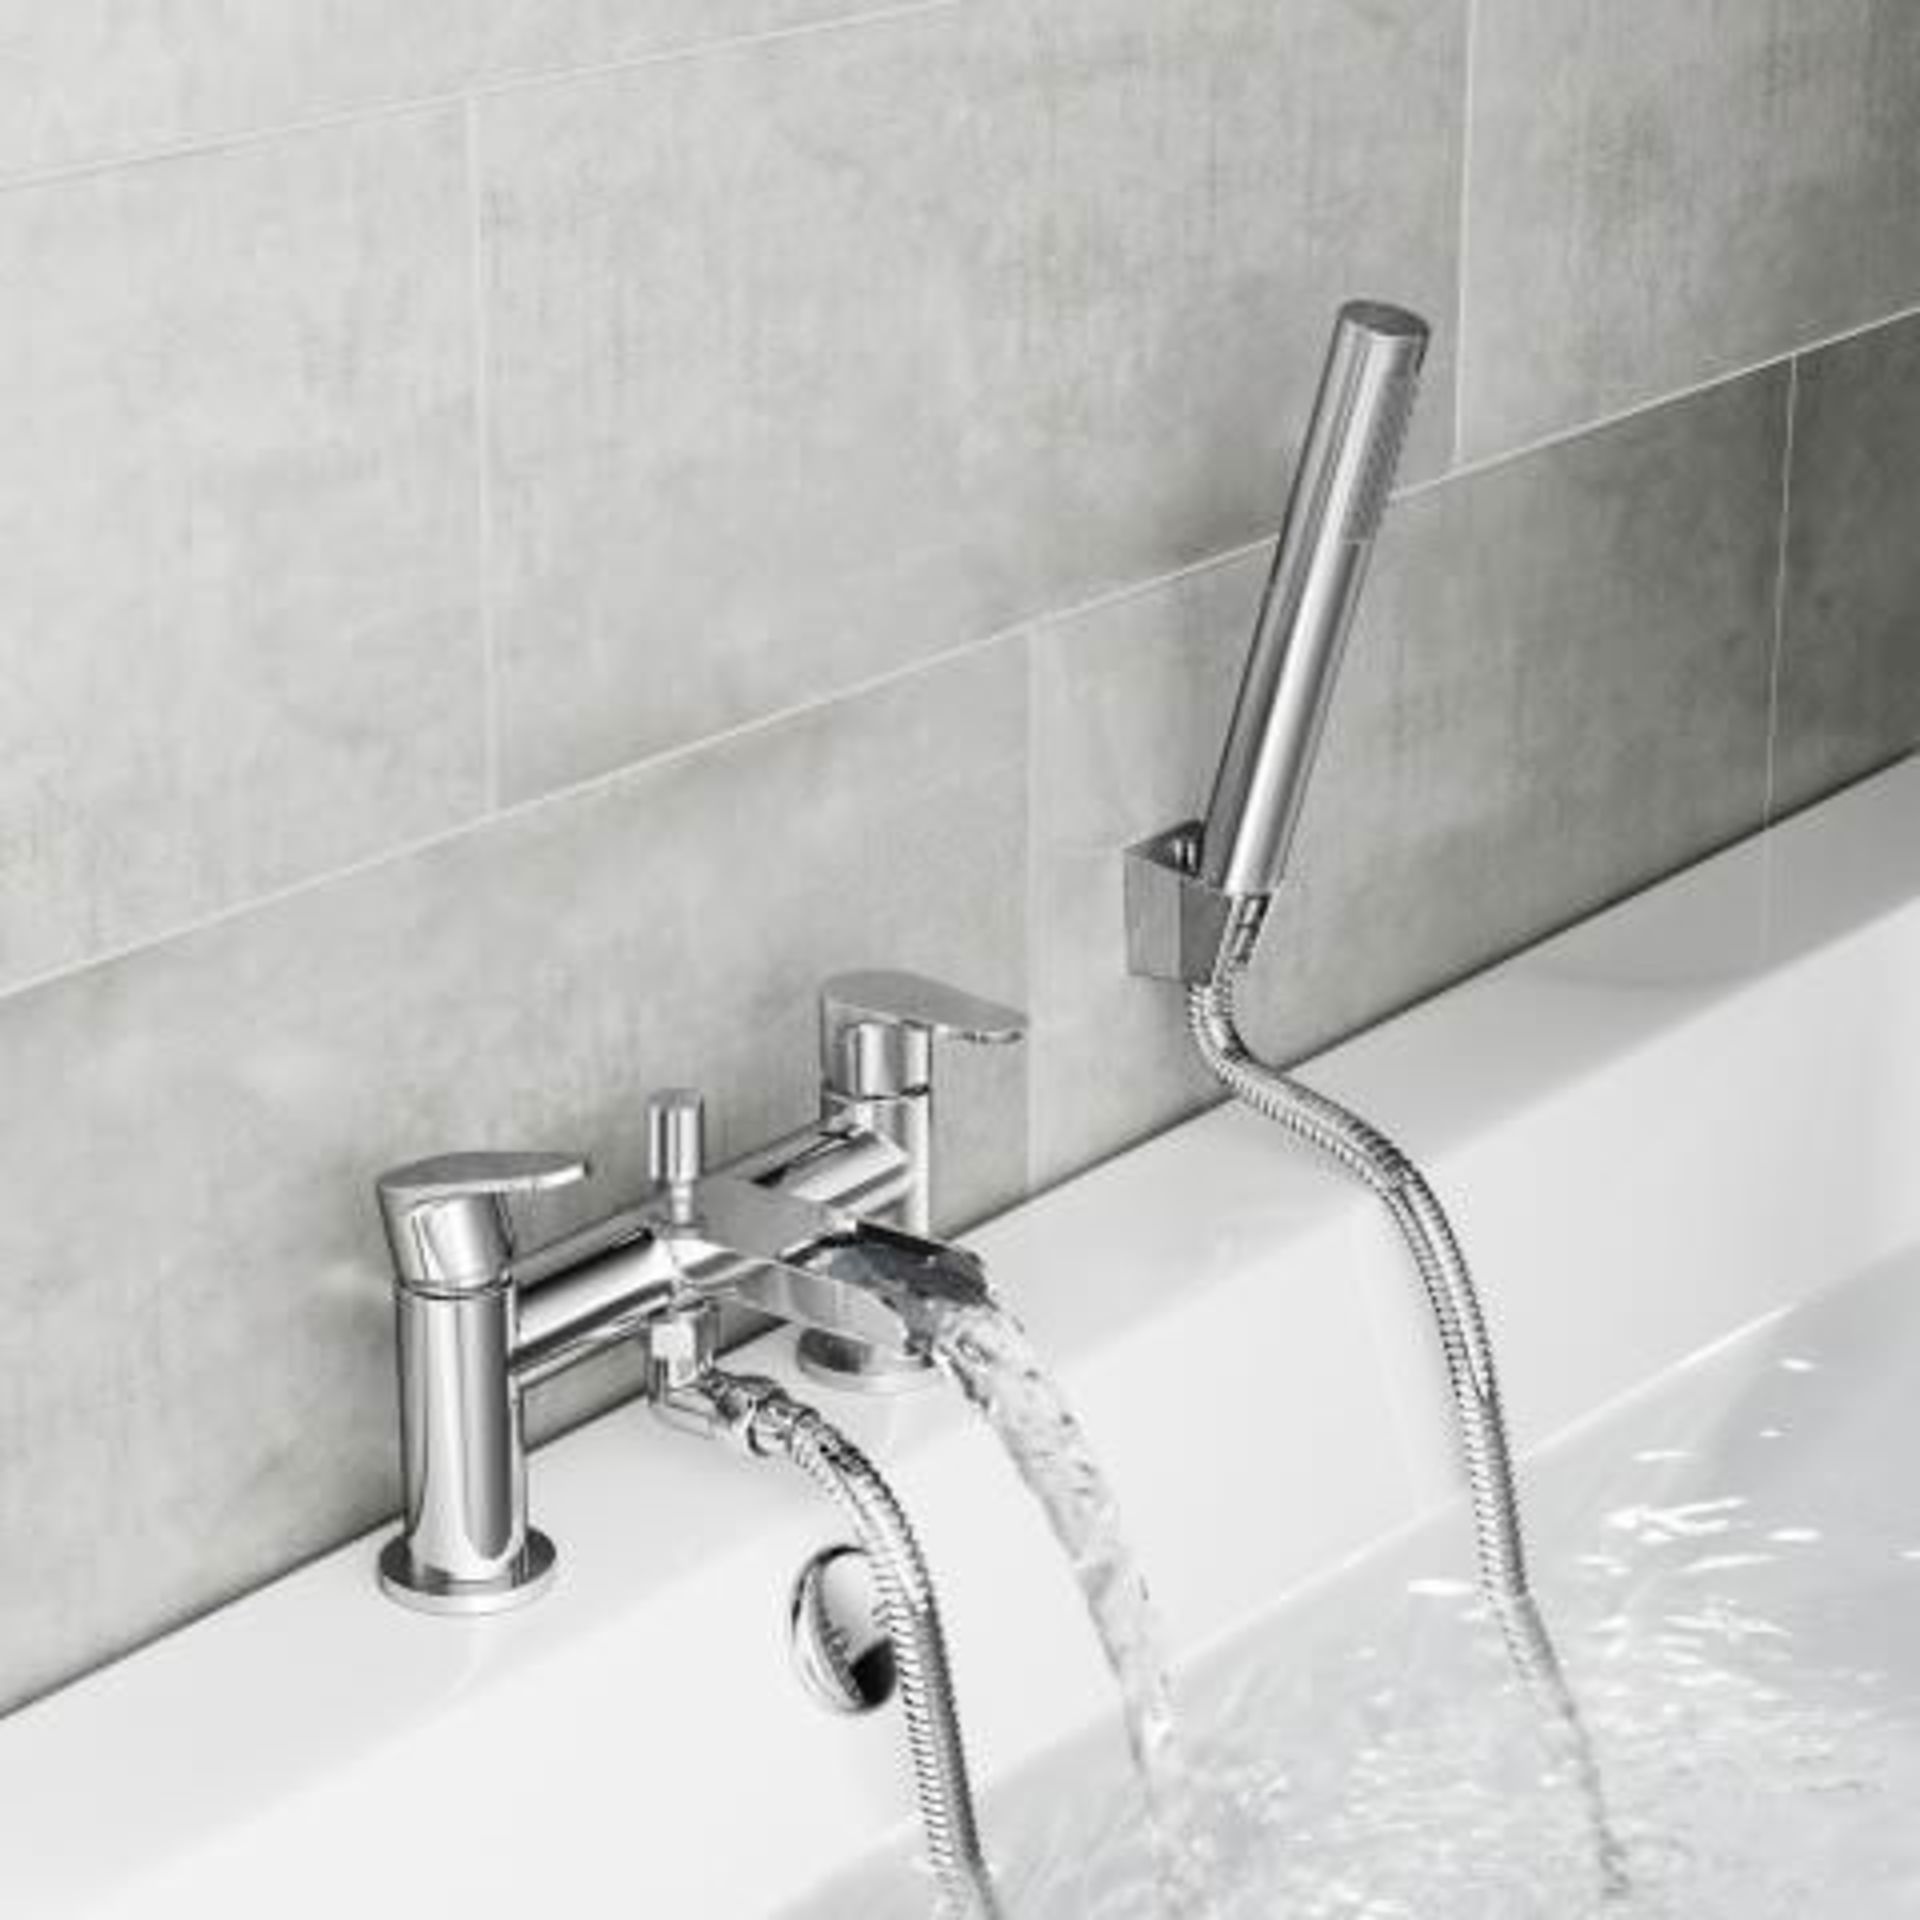 (J13) Cela Waterfall Bath Shower Mixer Tap with Hand Held Shower Head Presenting a contemporary - Image 3 of 3